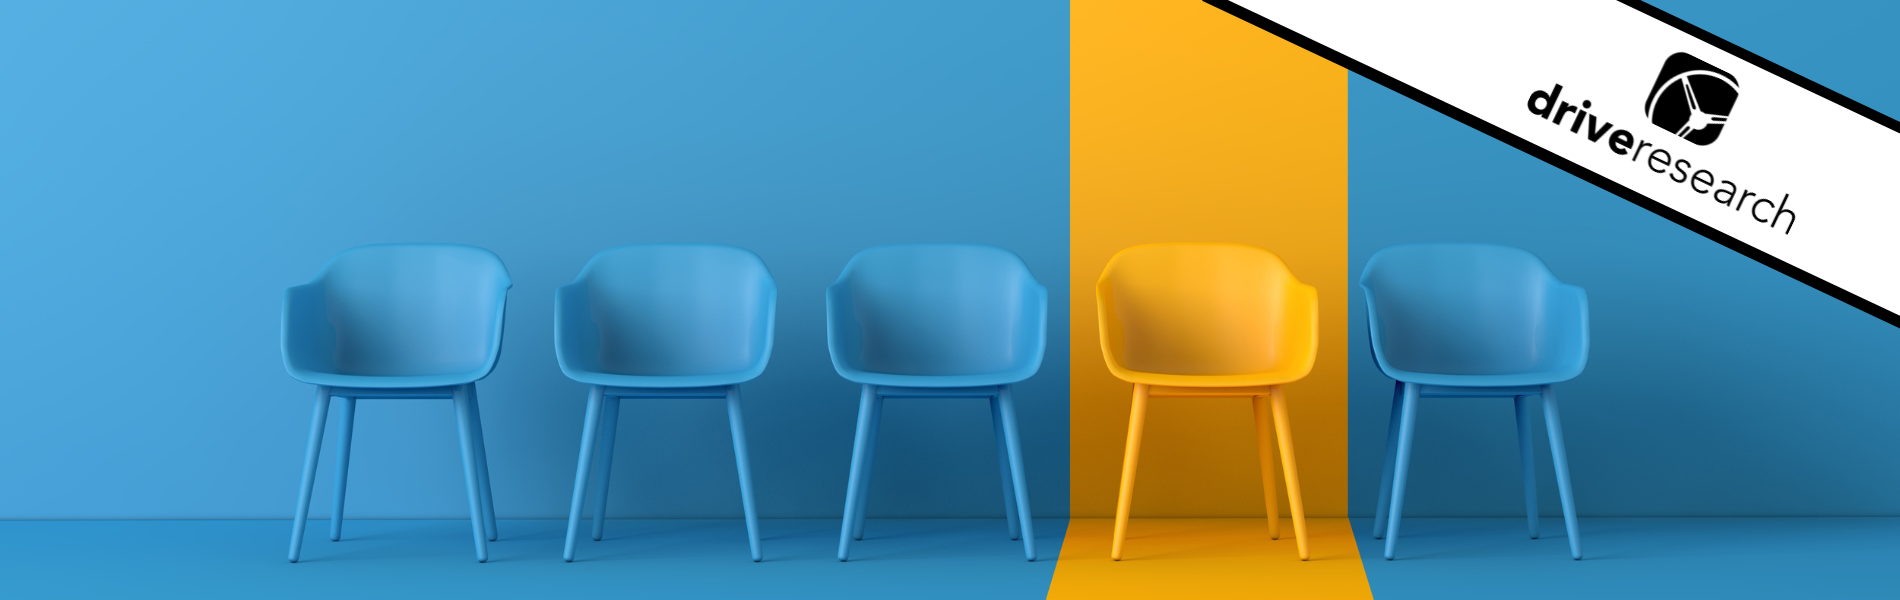 blue chairs and one yellow chair